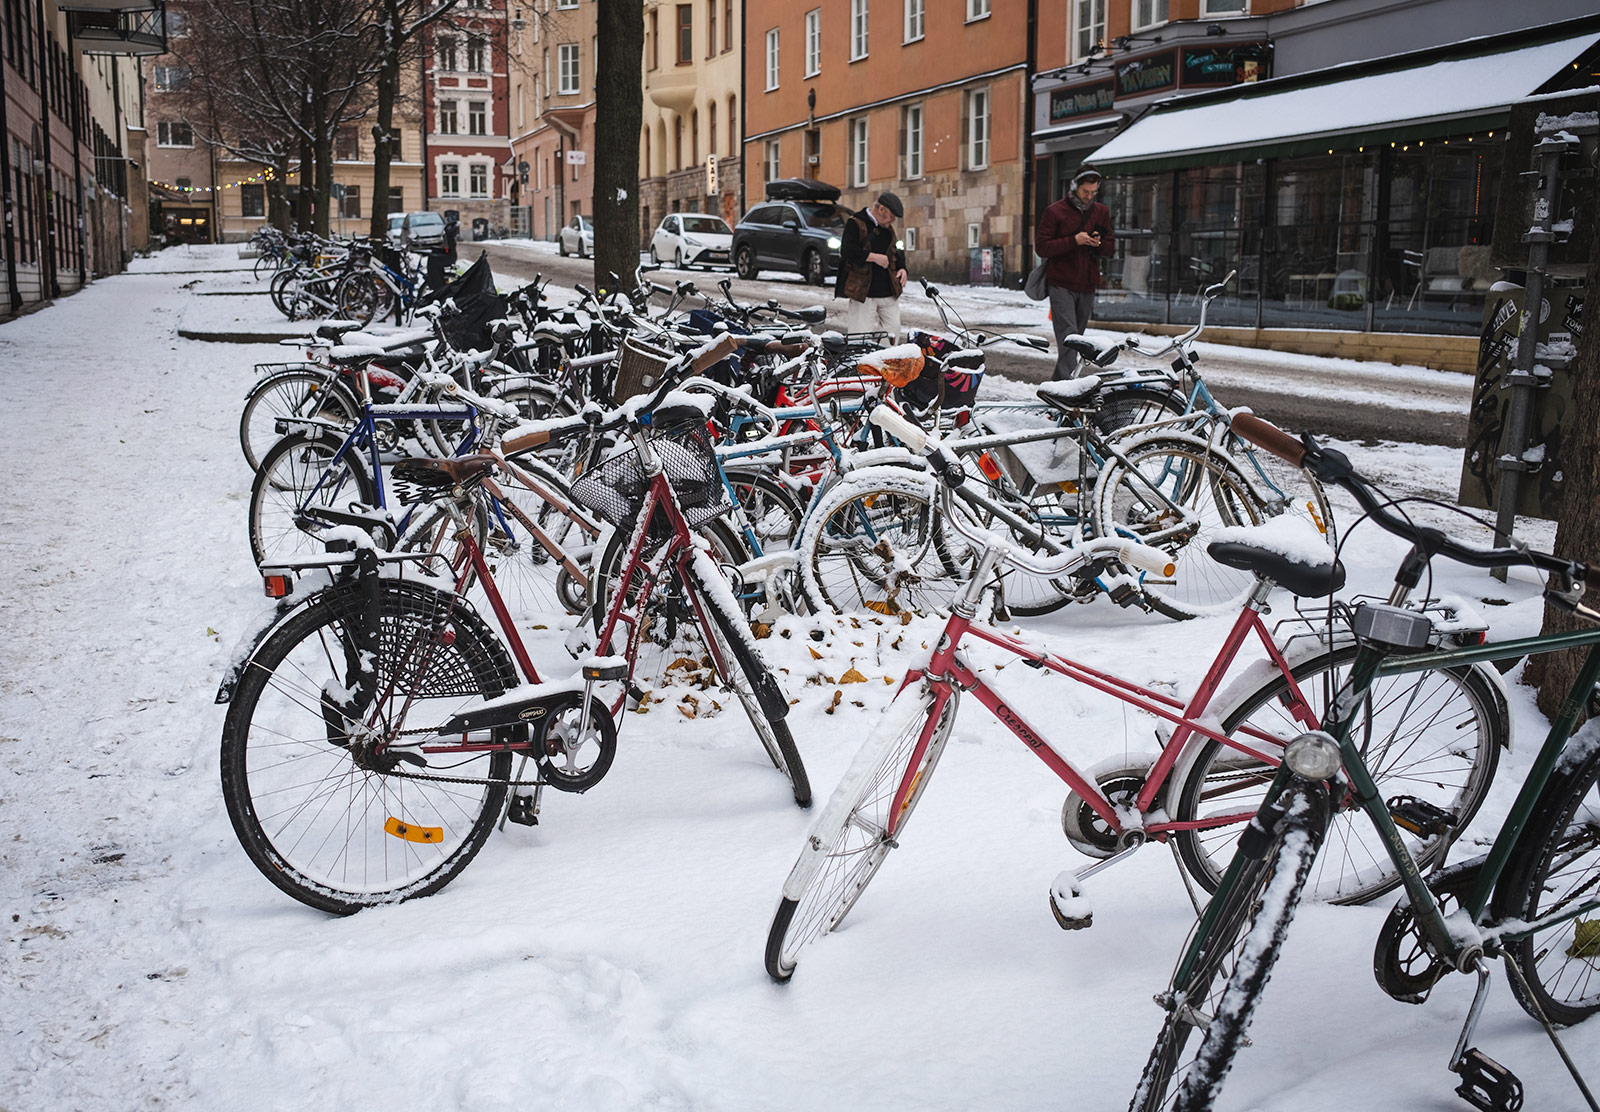 Bikes covered in snow